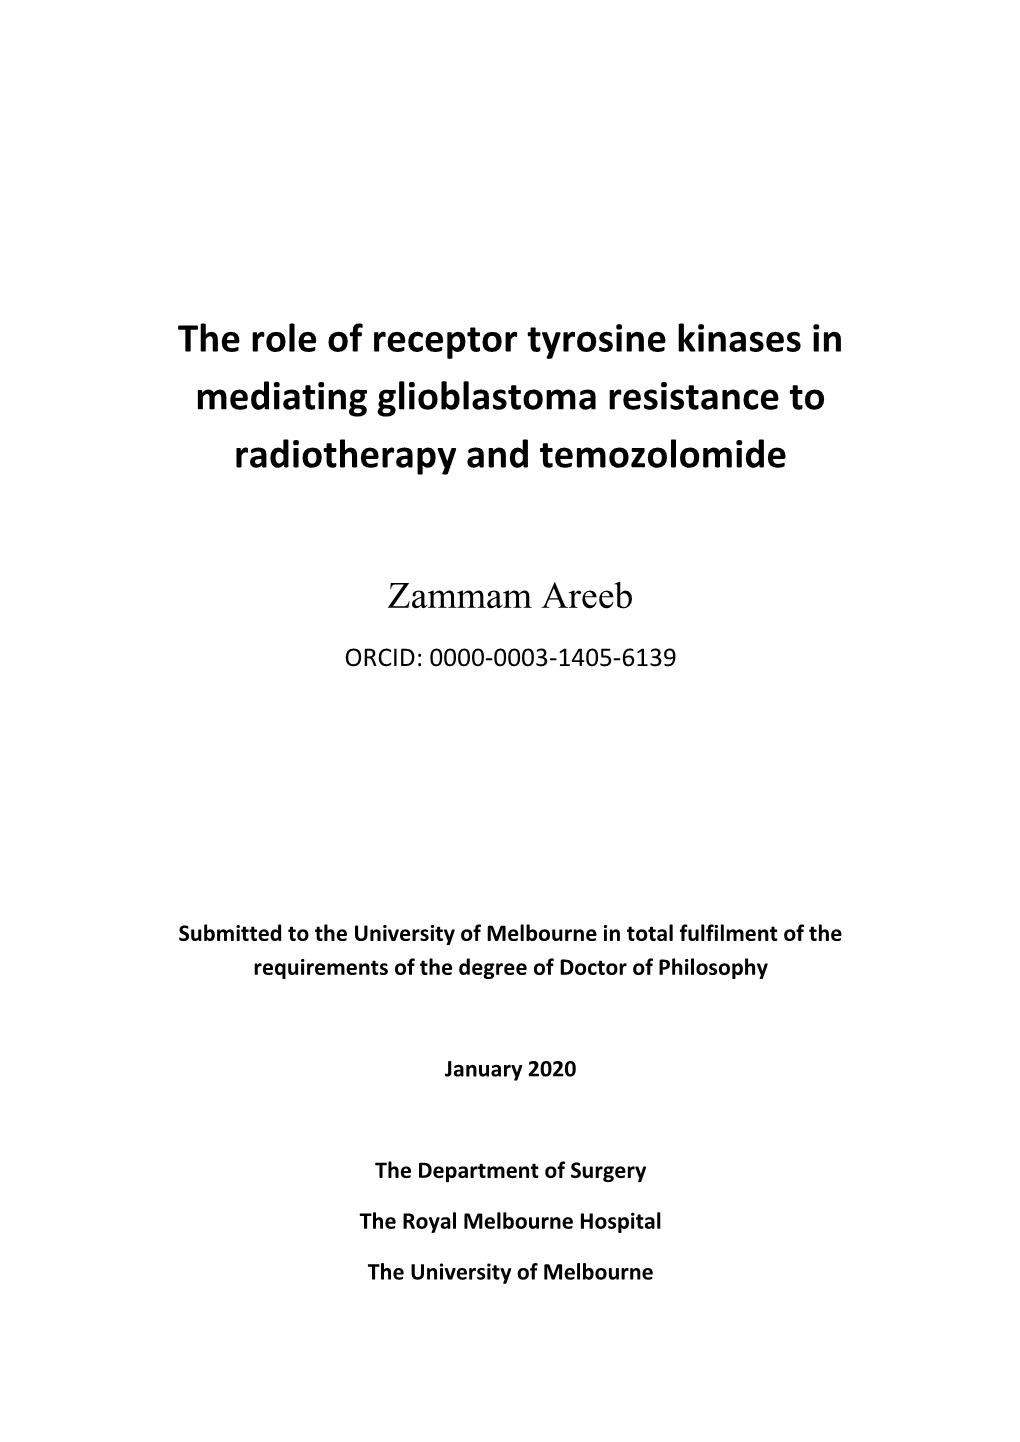 The Role of Receptor Tyrosine Kinases in Mediating Glioblastoma Resistance to Radiotherapy and Temozolomide